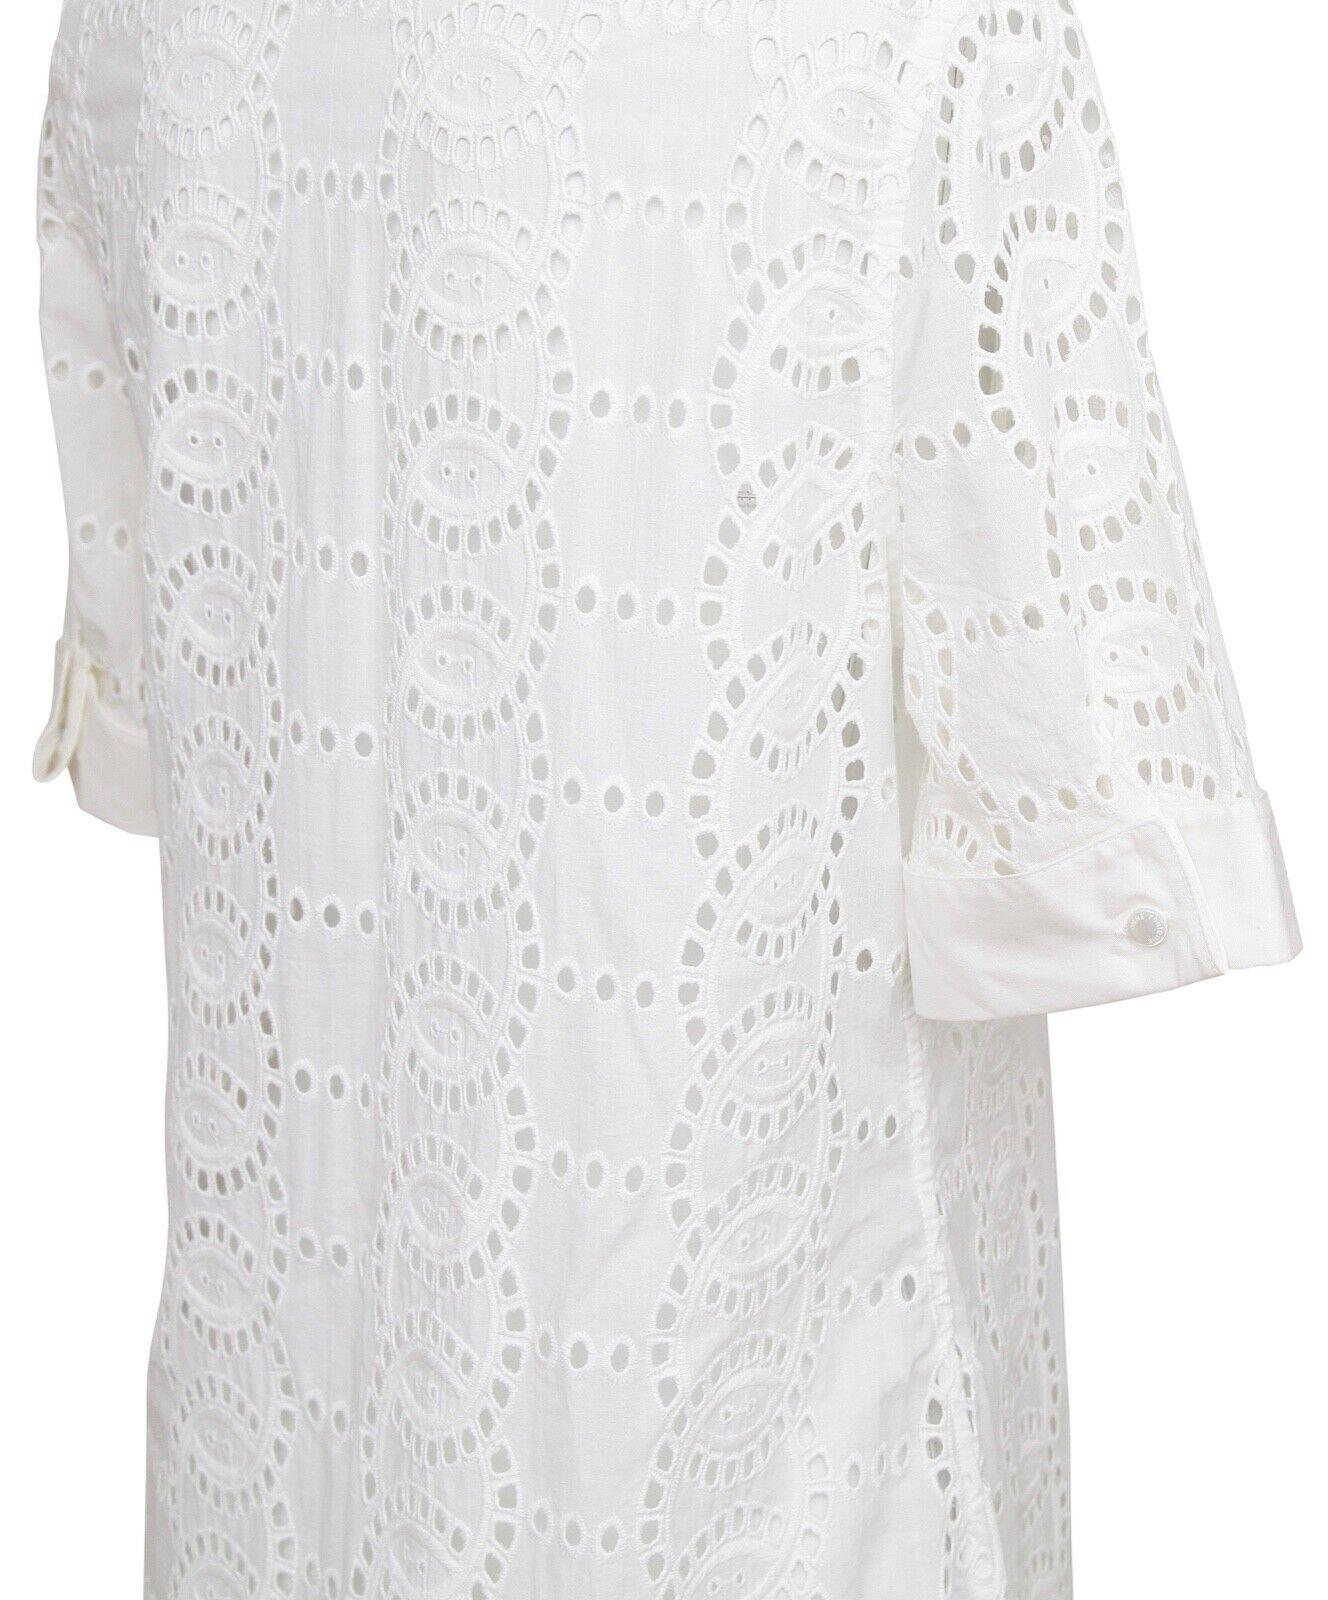 ANNE FONTAINE Shirt Dress White Short Sleeve Button Down Eyelet Collar Cotton 40 For Sale 1